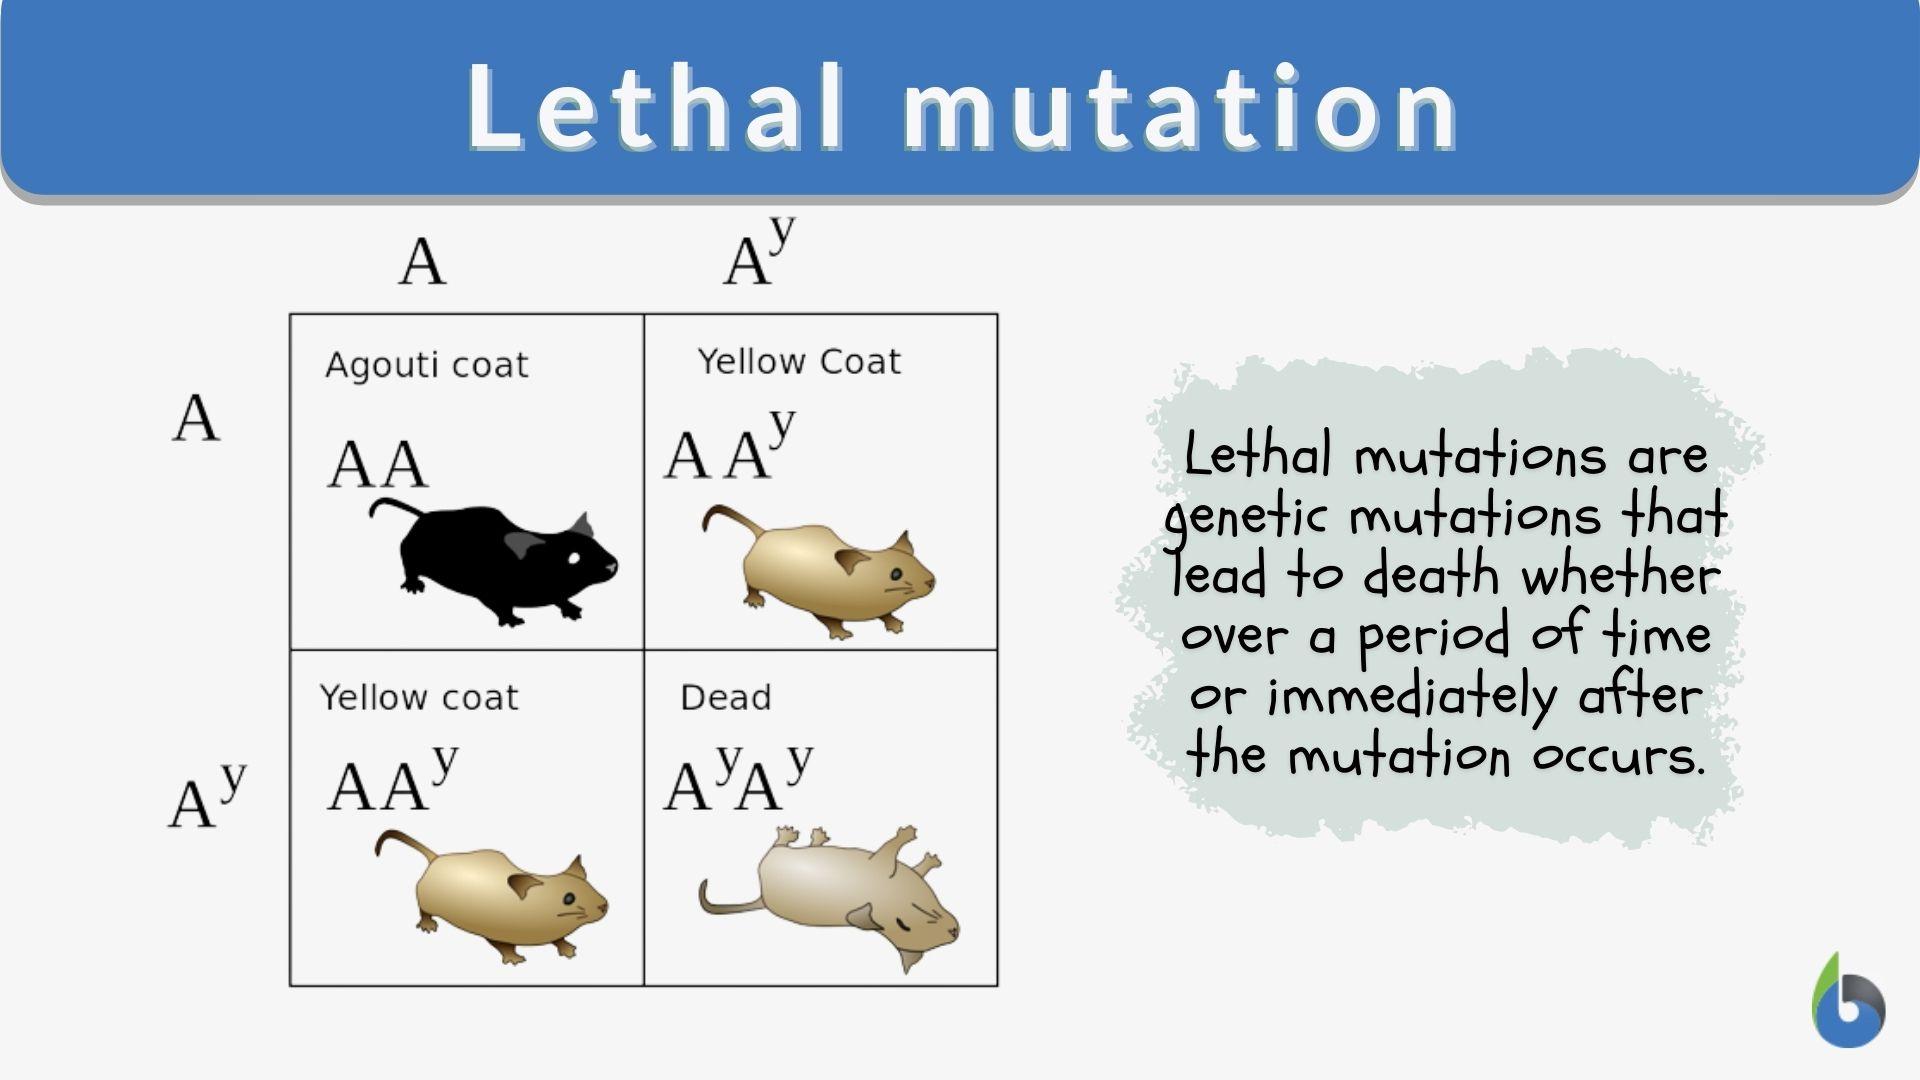 Lethal mutation Definition and Examples - Biology Online Dictionary